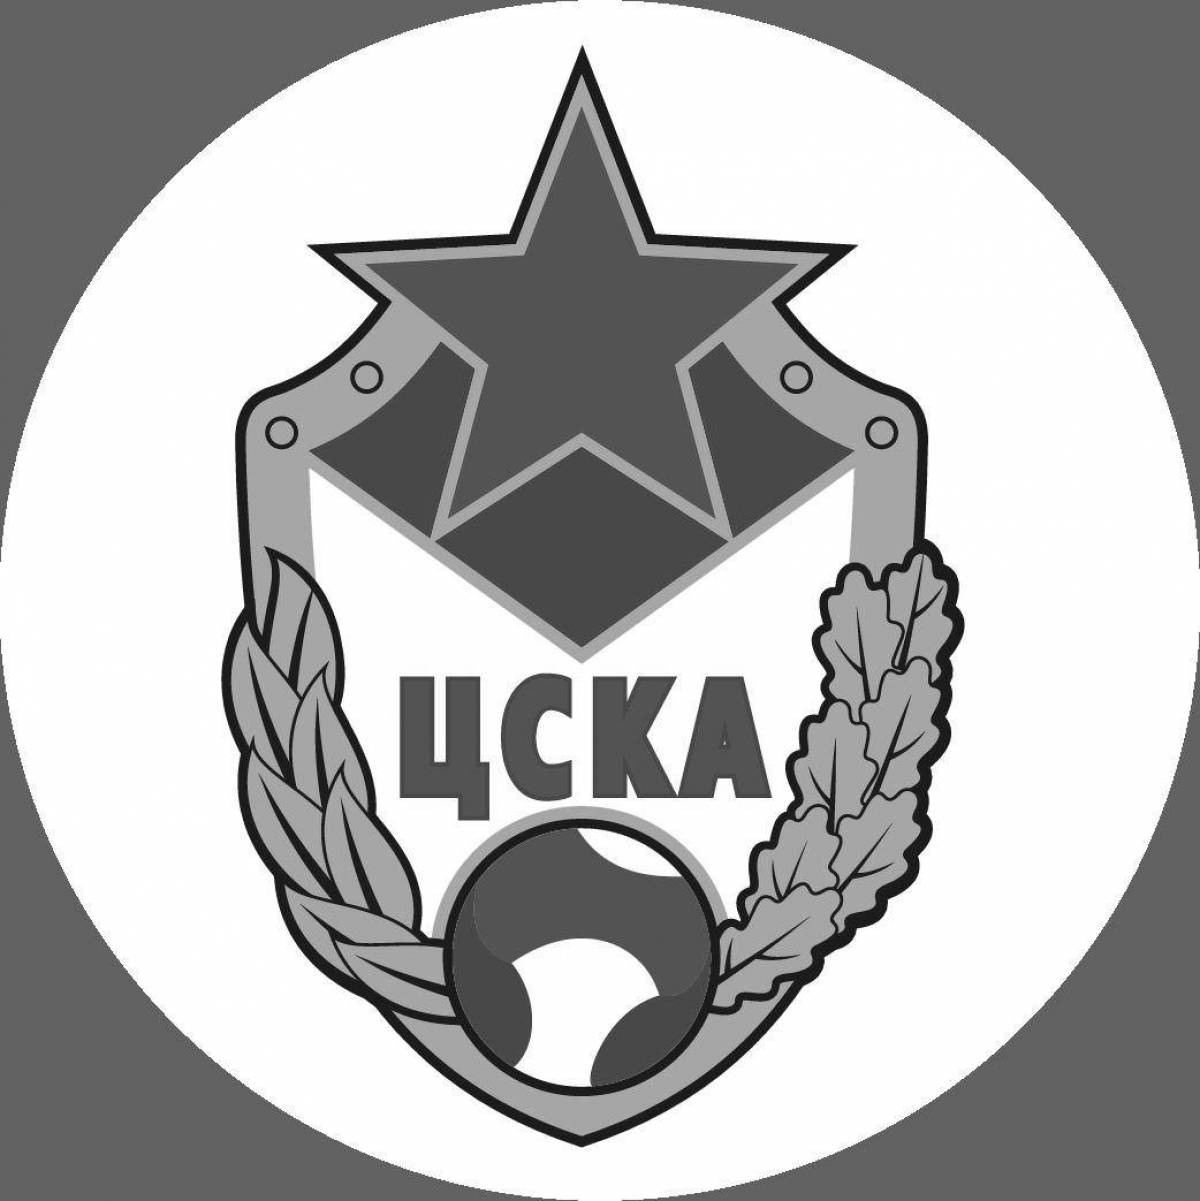 Awesome CSKA emblem coloring page